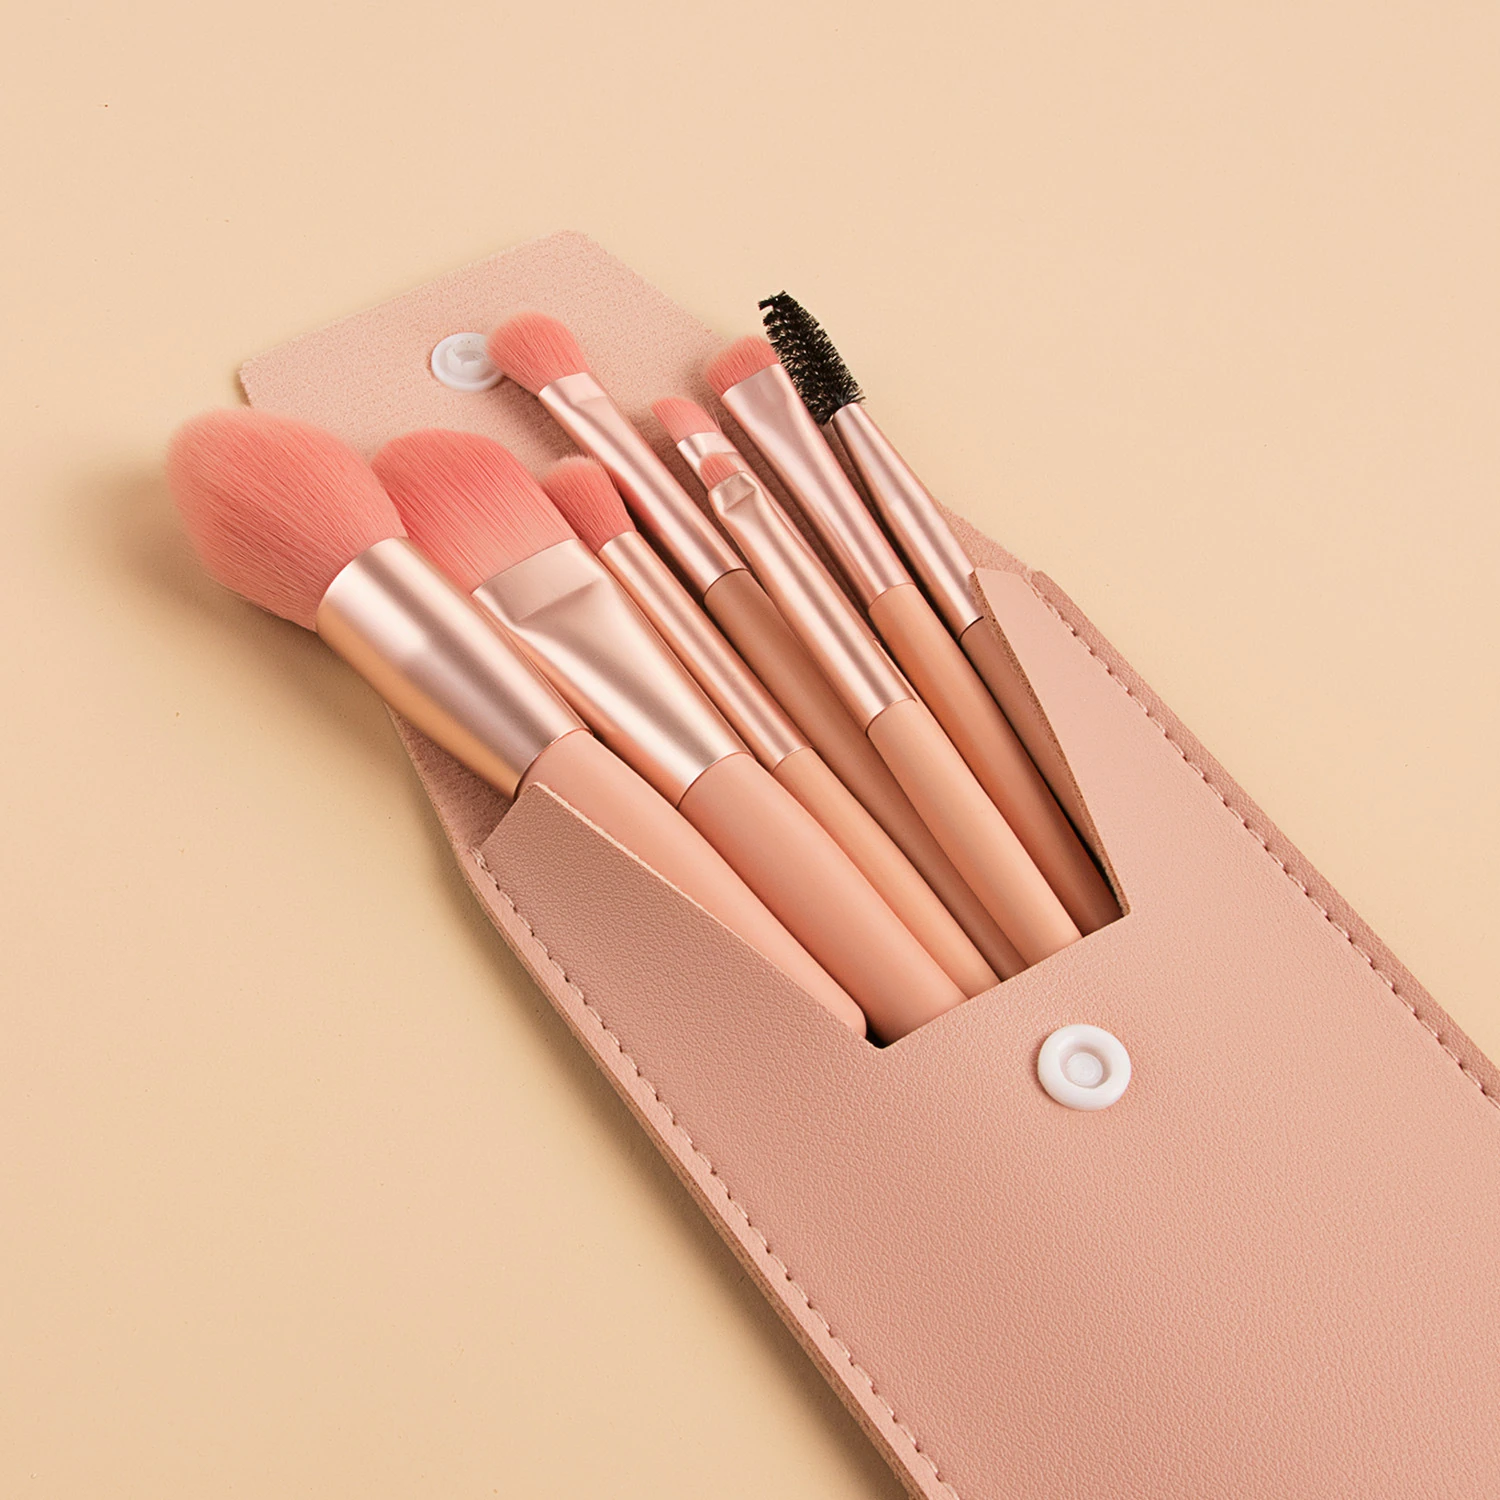 Travel Makeup Brush Pouch - $1.3 on AliExpress, via Thieve •